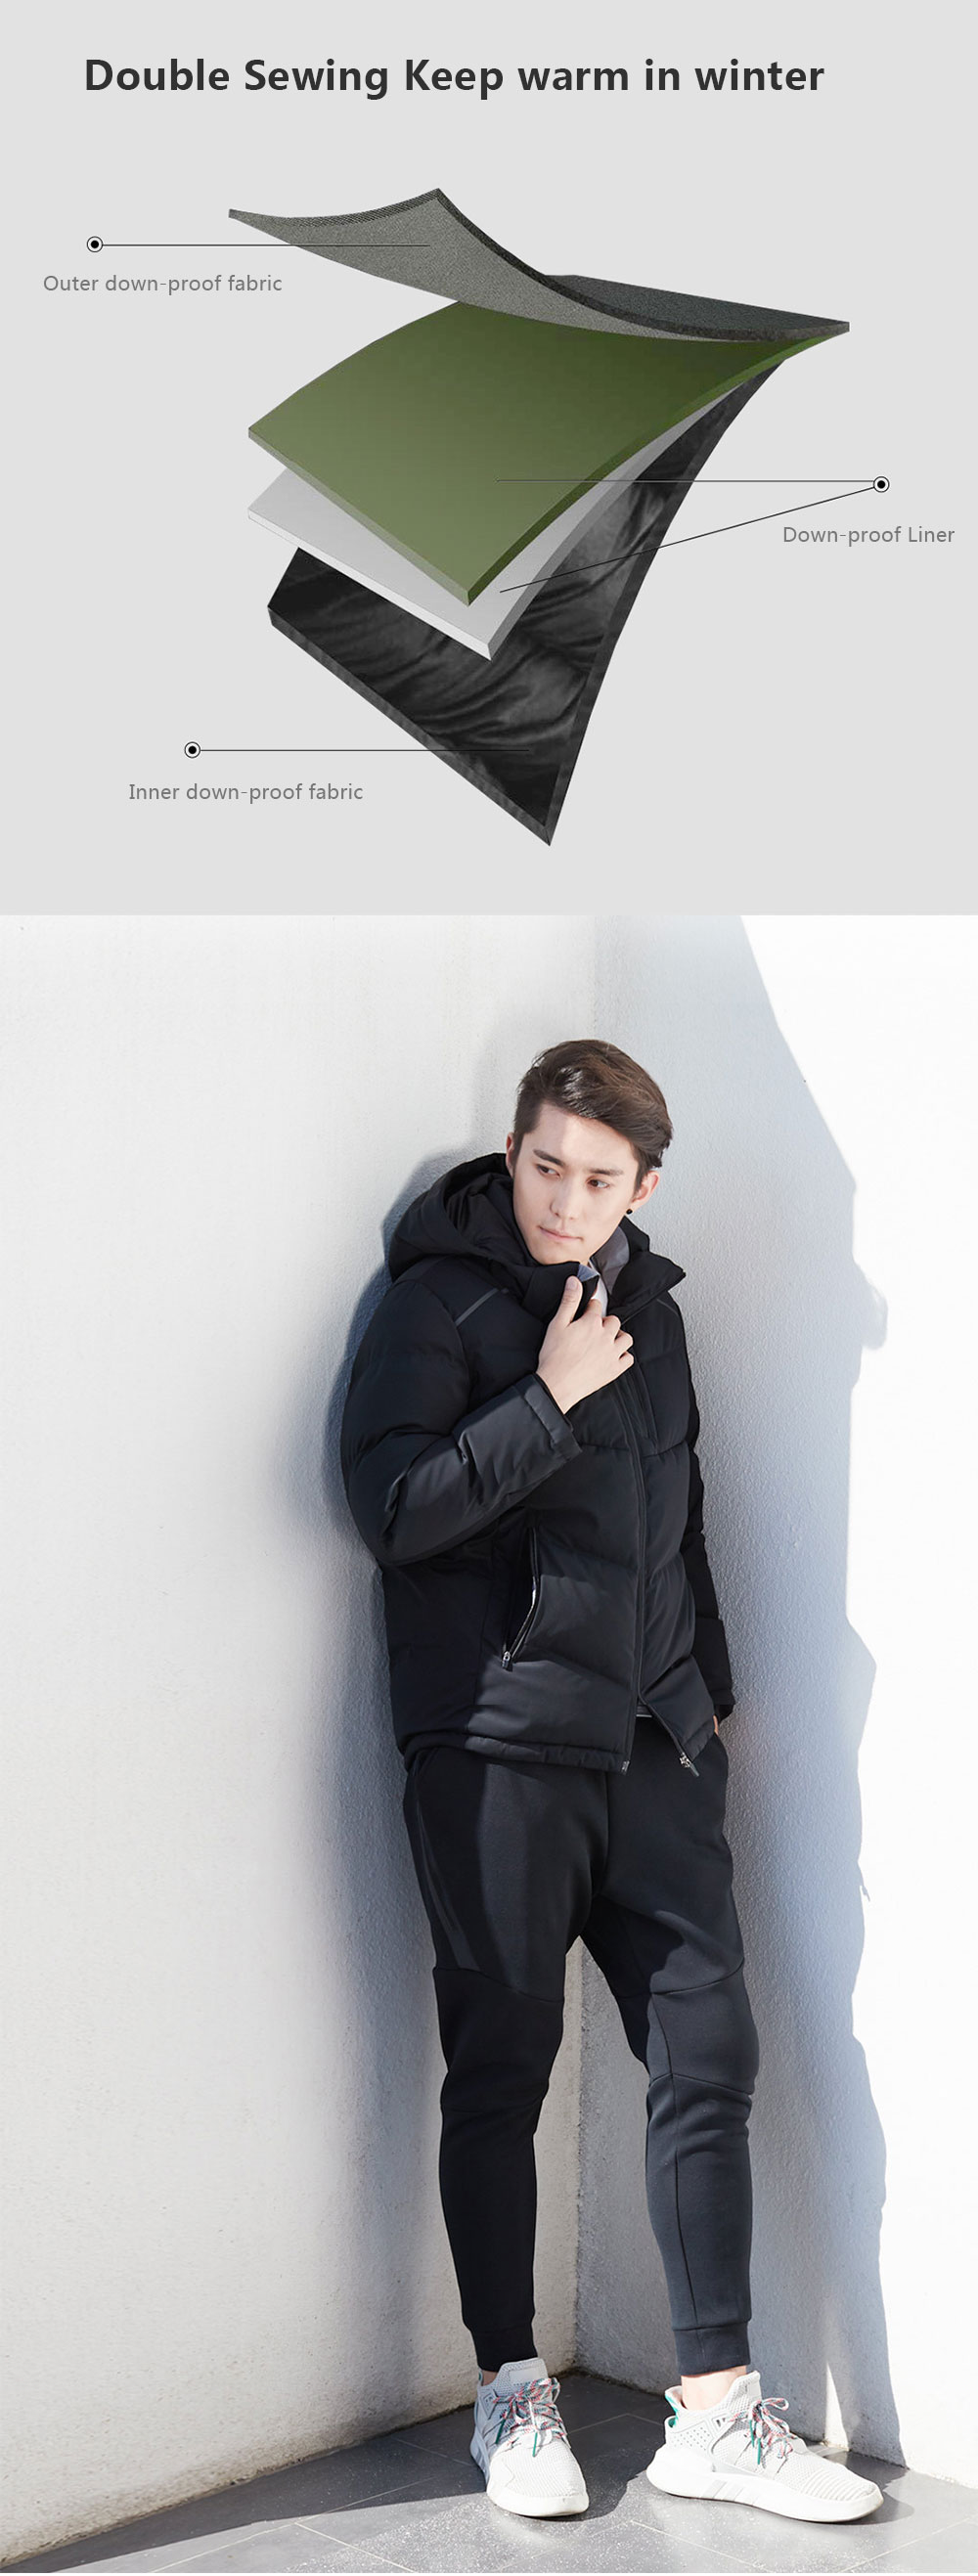 MITOWN LIFE Knit Comfortable Down Coat from Xiaomi Youpin